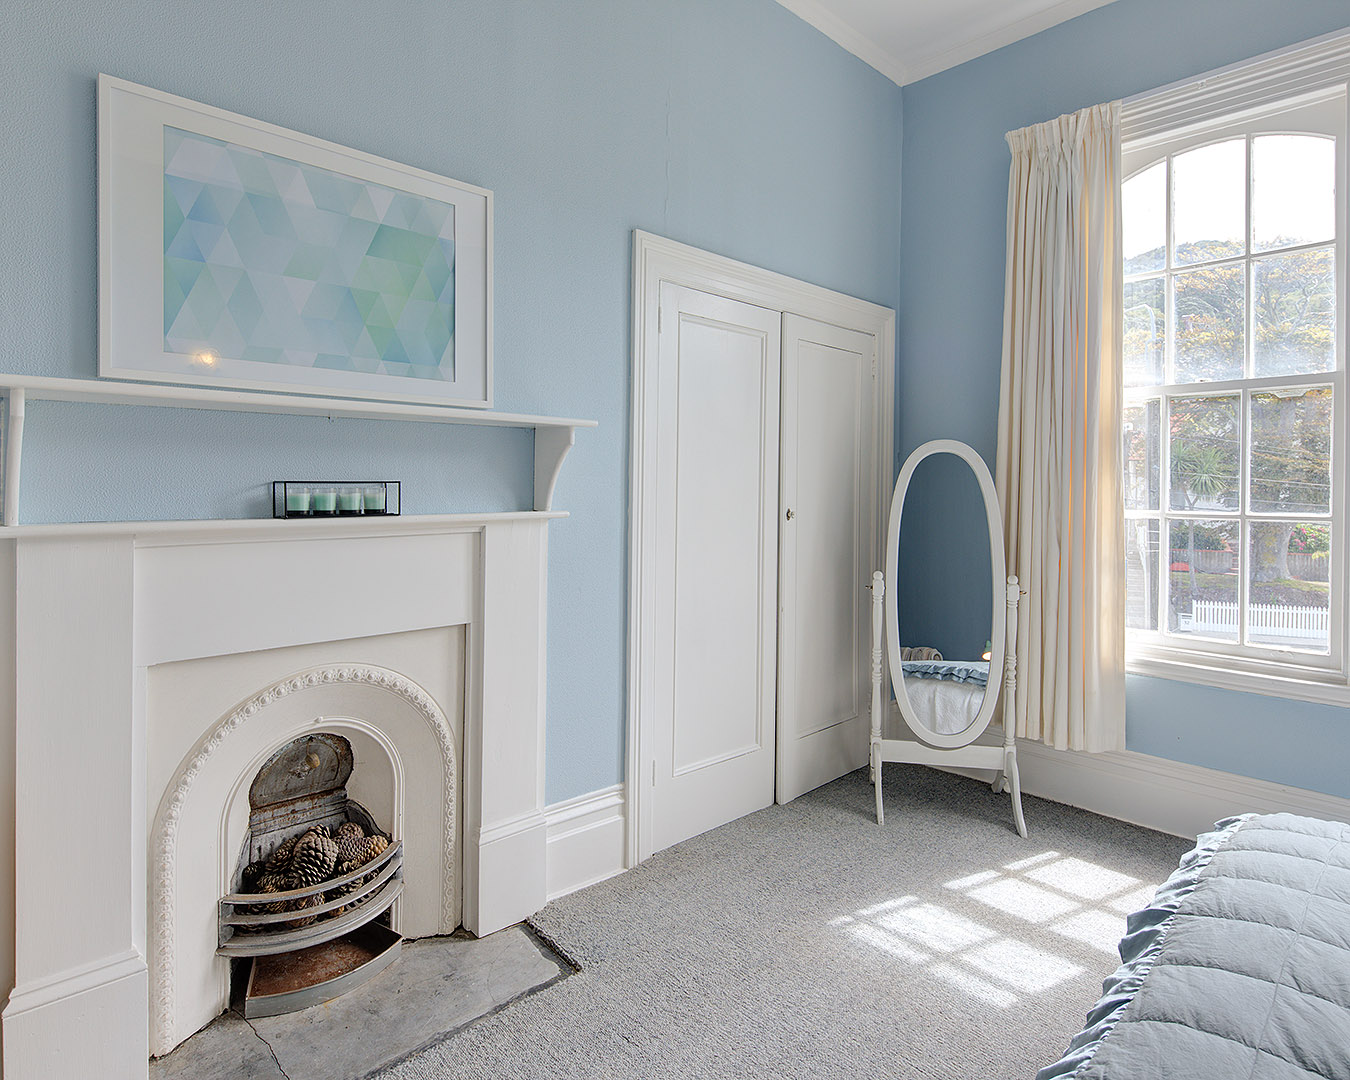 A lovely blue and white interior of a room with distinct Victorian-era vibes.